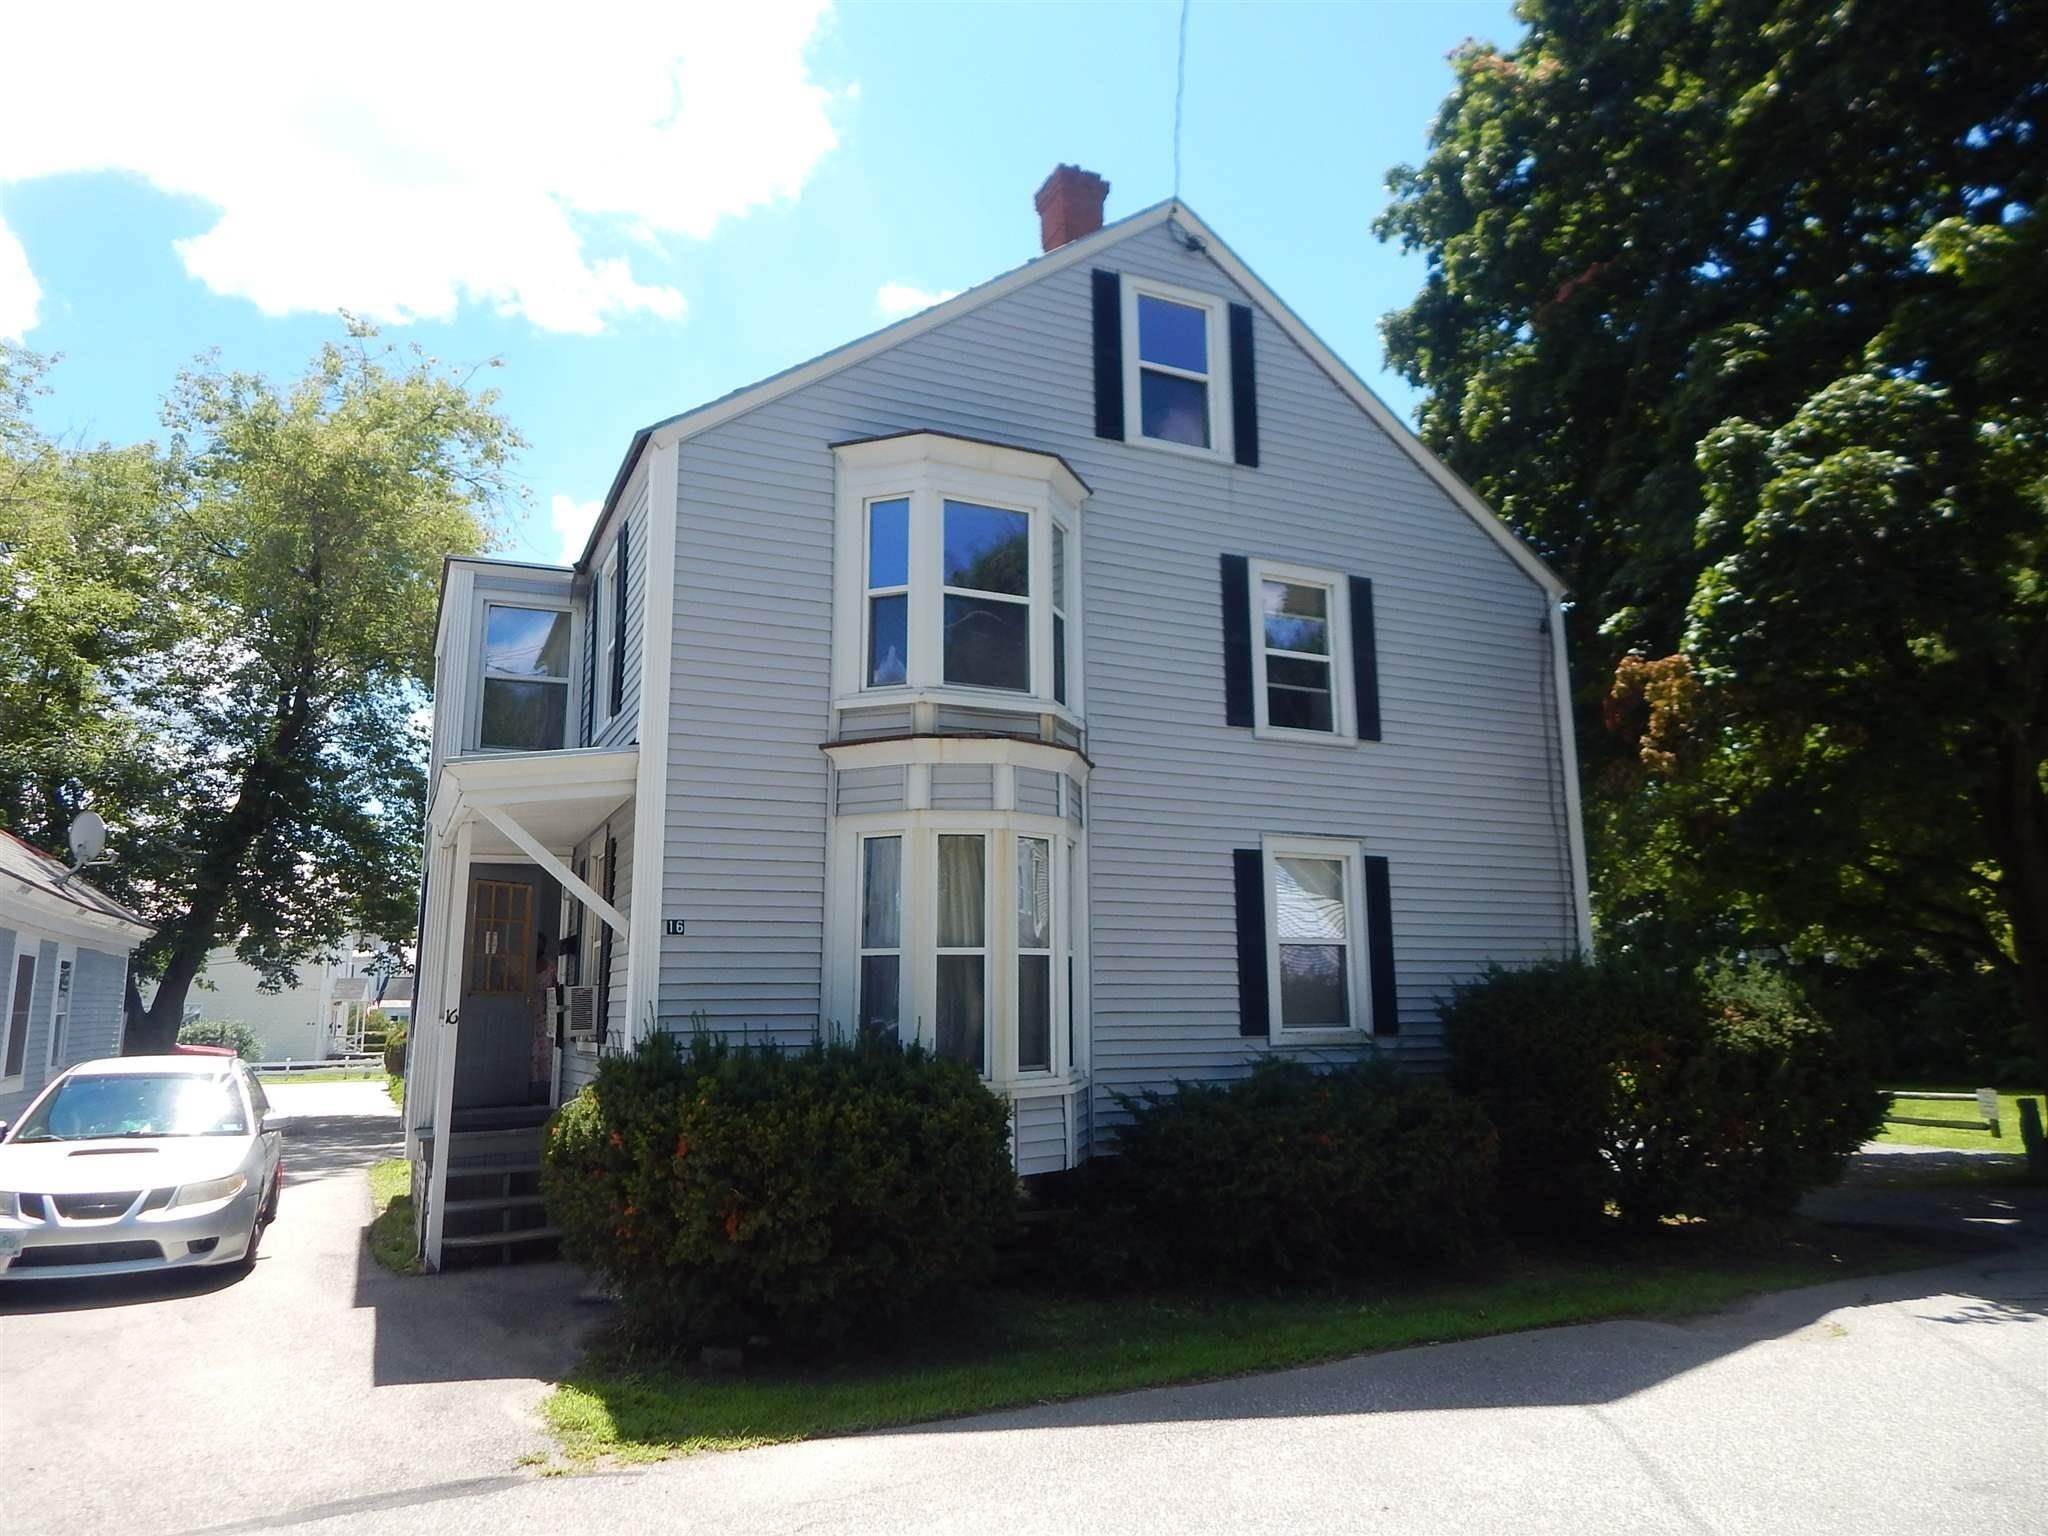 2. Multi Family for Sale at Keene, NH 03431